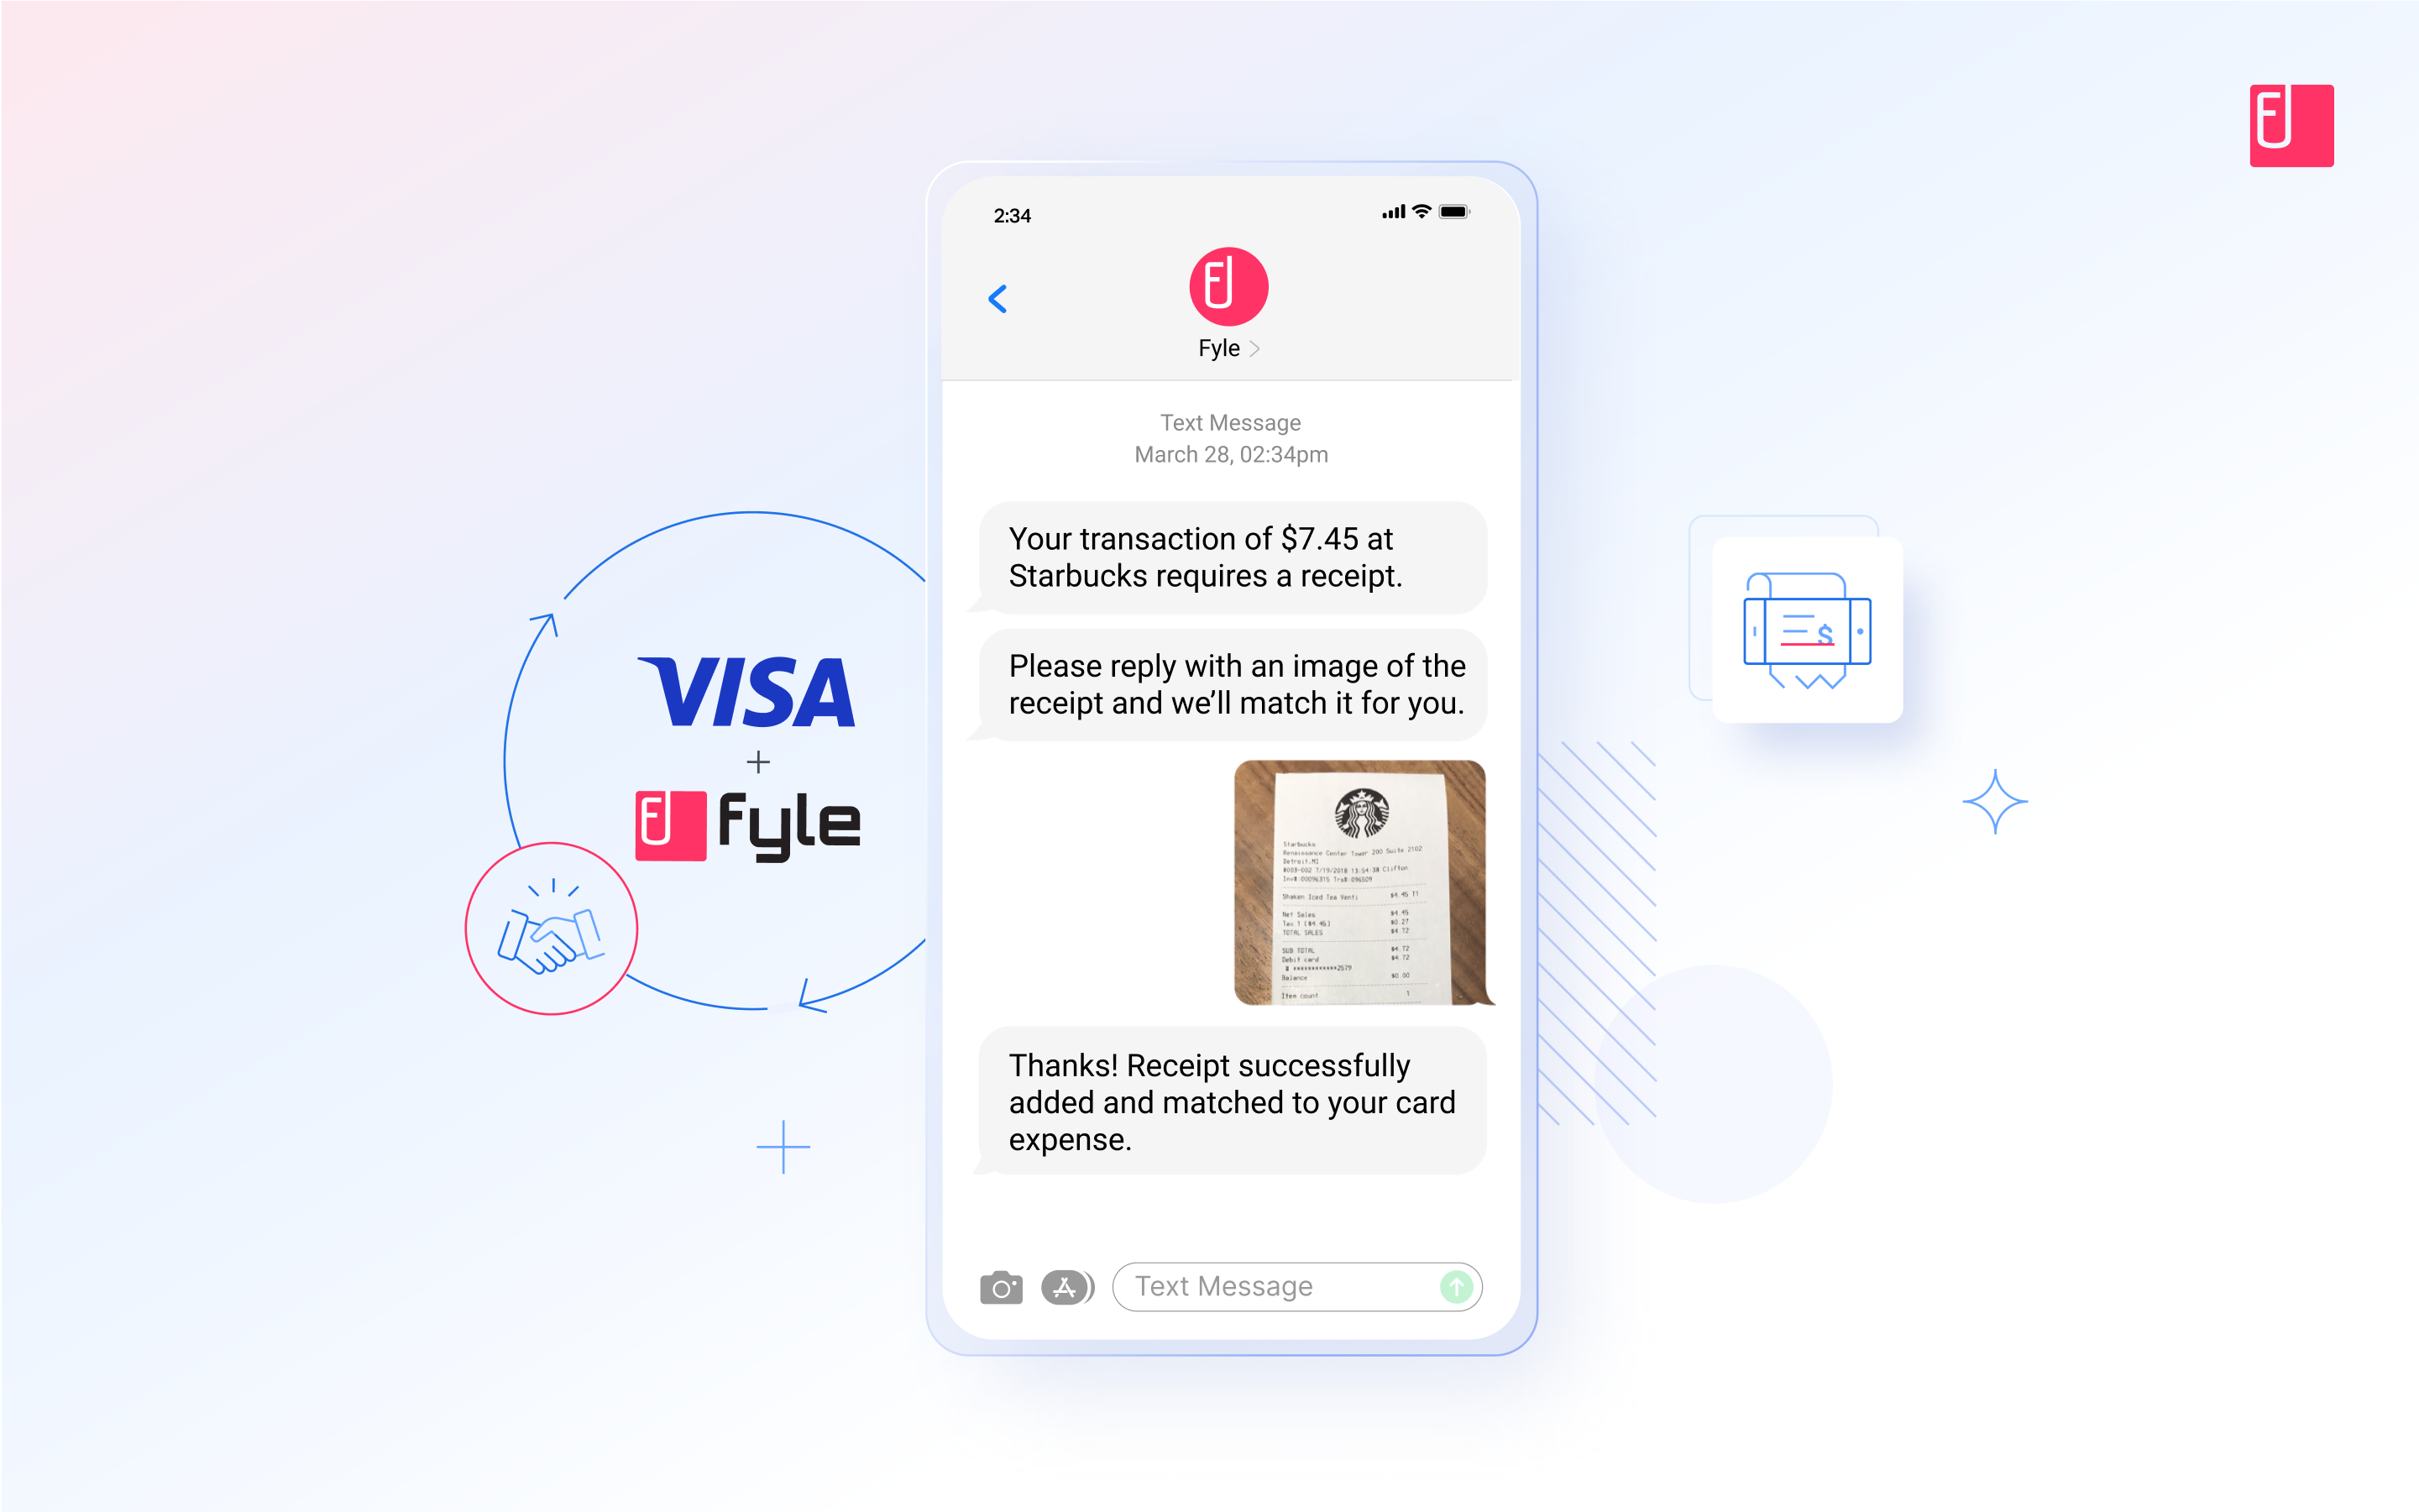 Reconcile credit card spend in real-time with the Visa integration